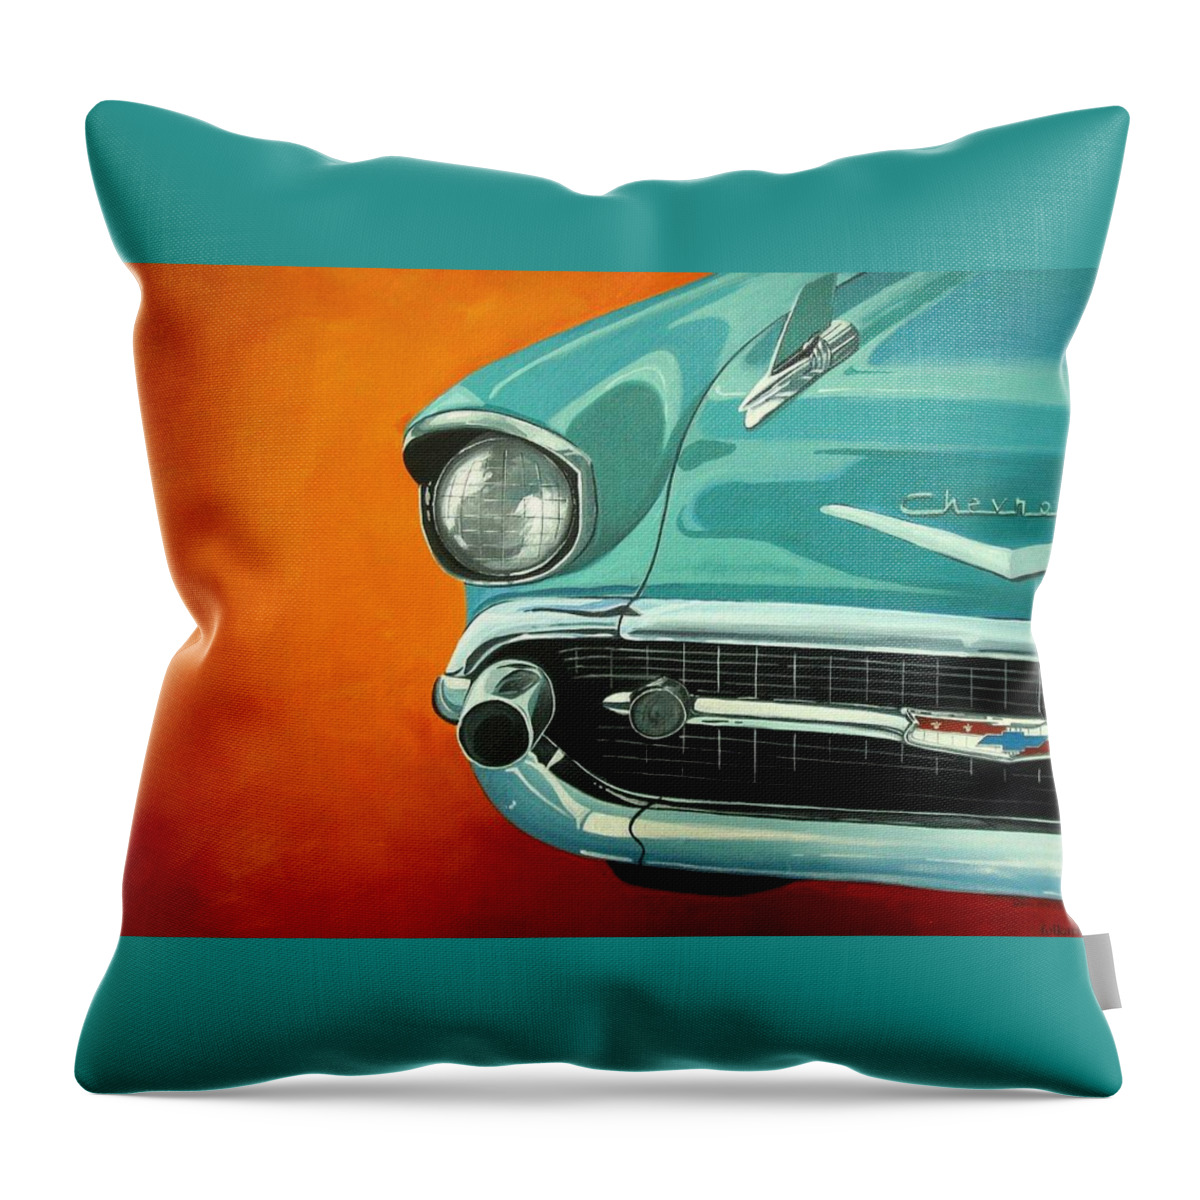 Folk Art Throw Pillow featuring the painting Aqua 1957 Chevy Bel Air - folk art by Debbie Criswell